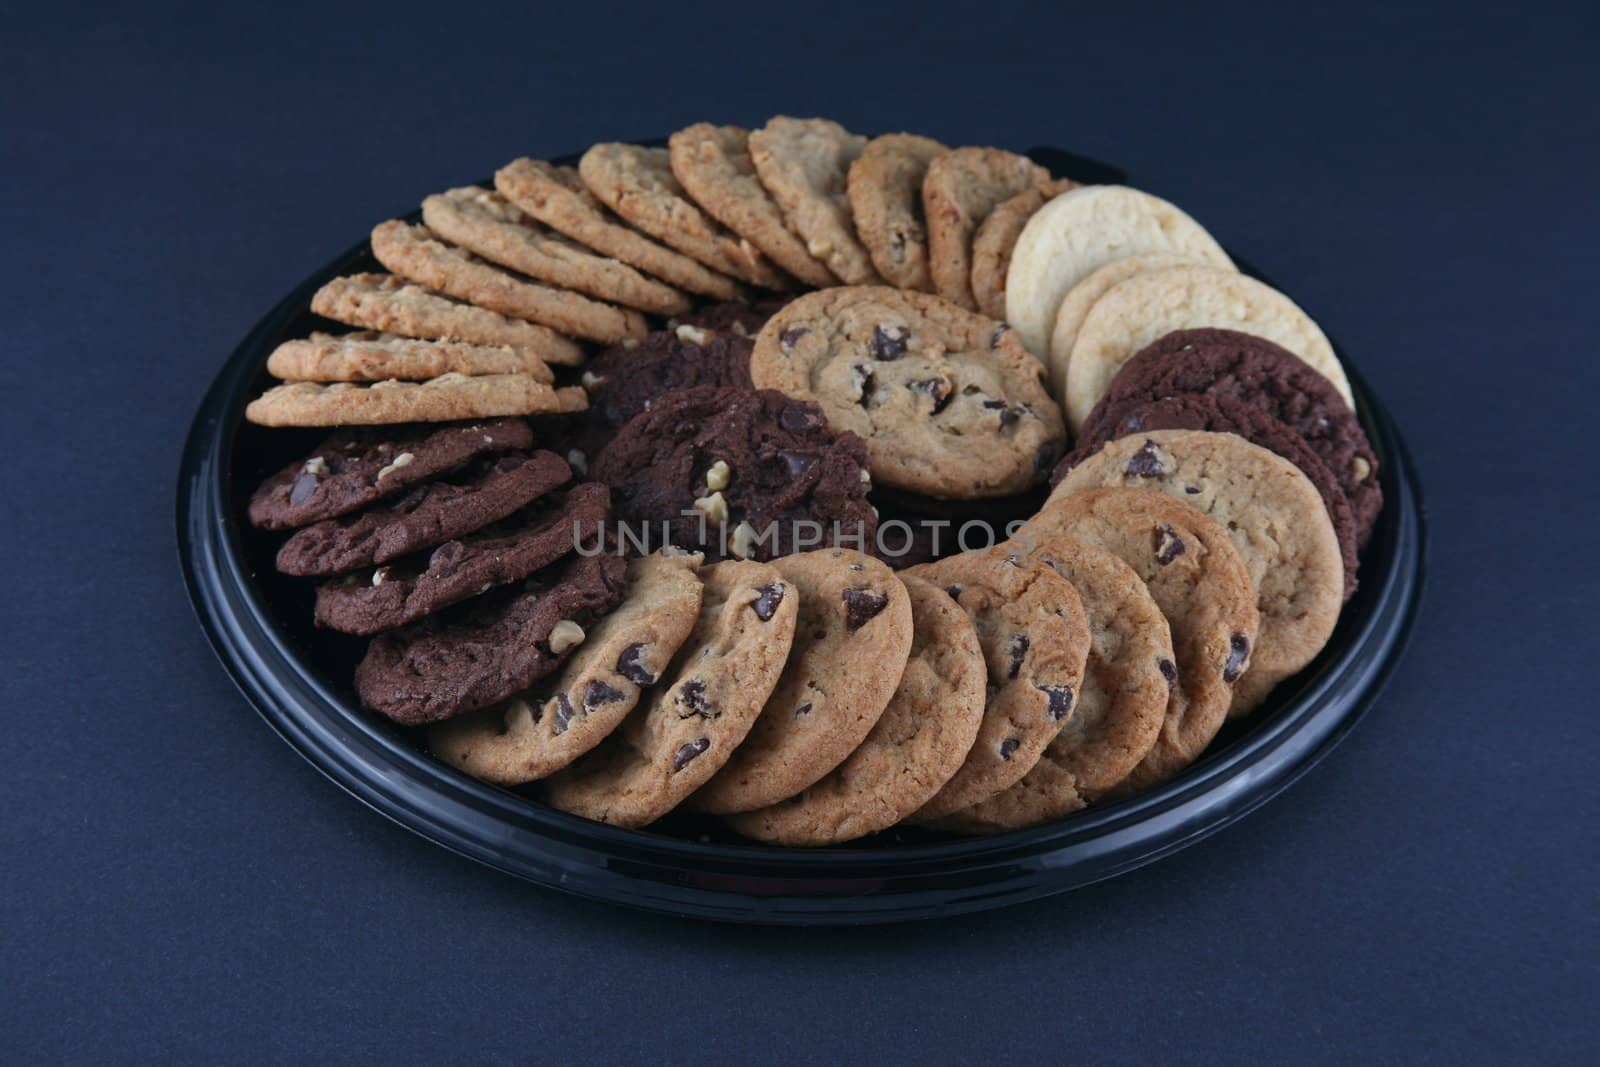 Variety of delicious cookies on a platter